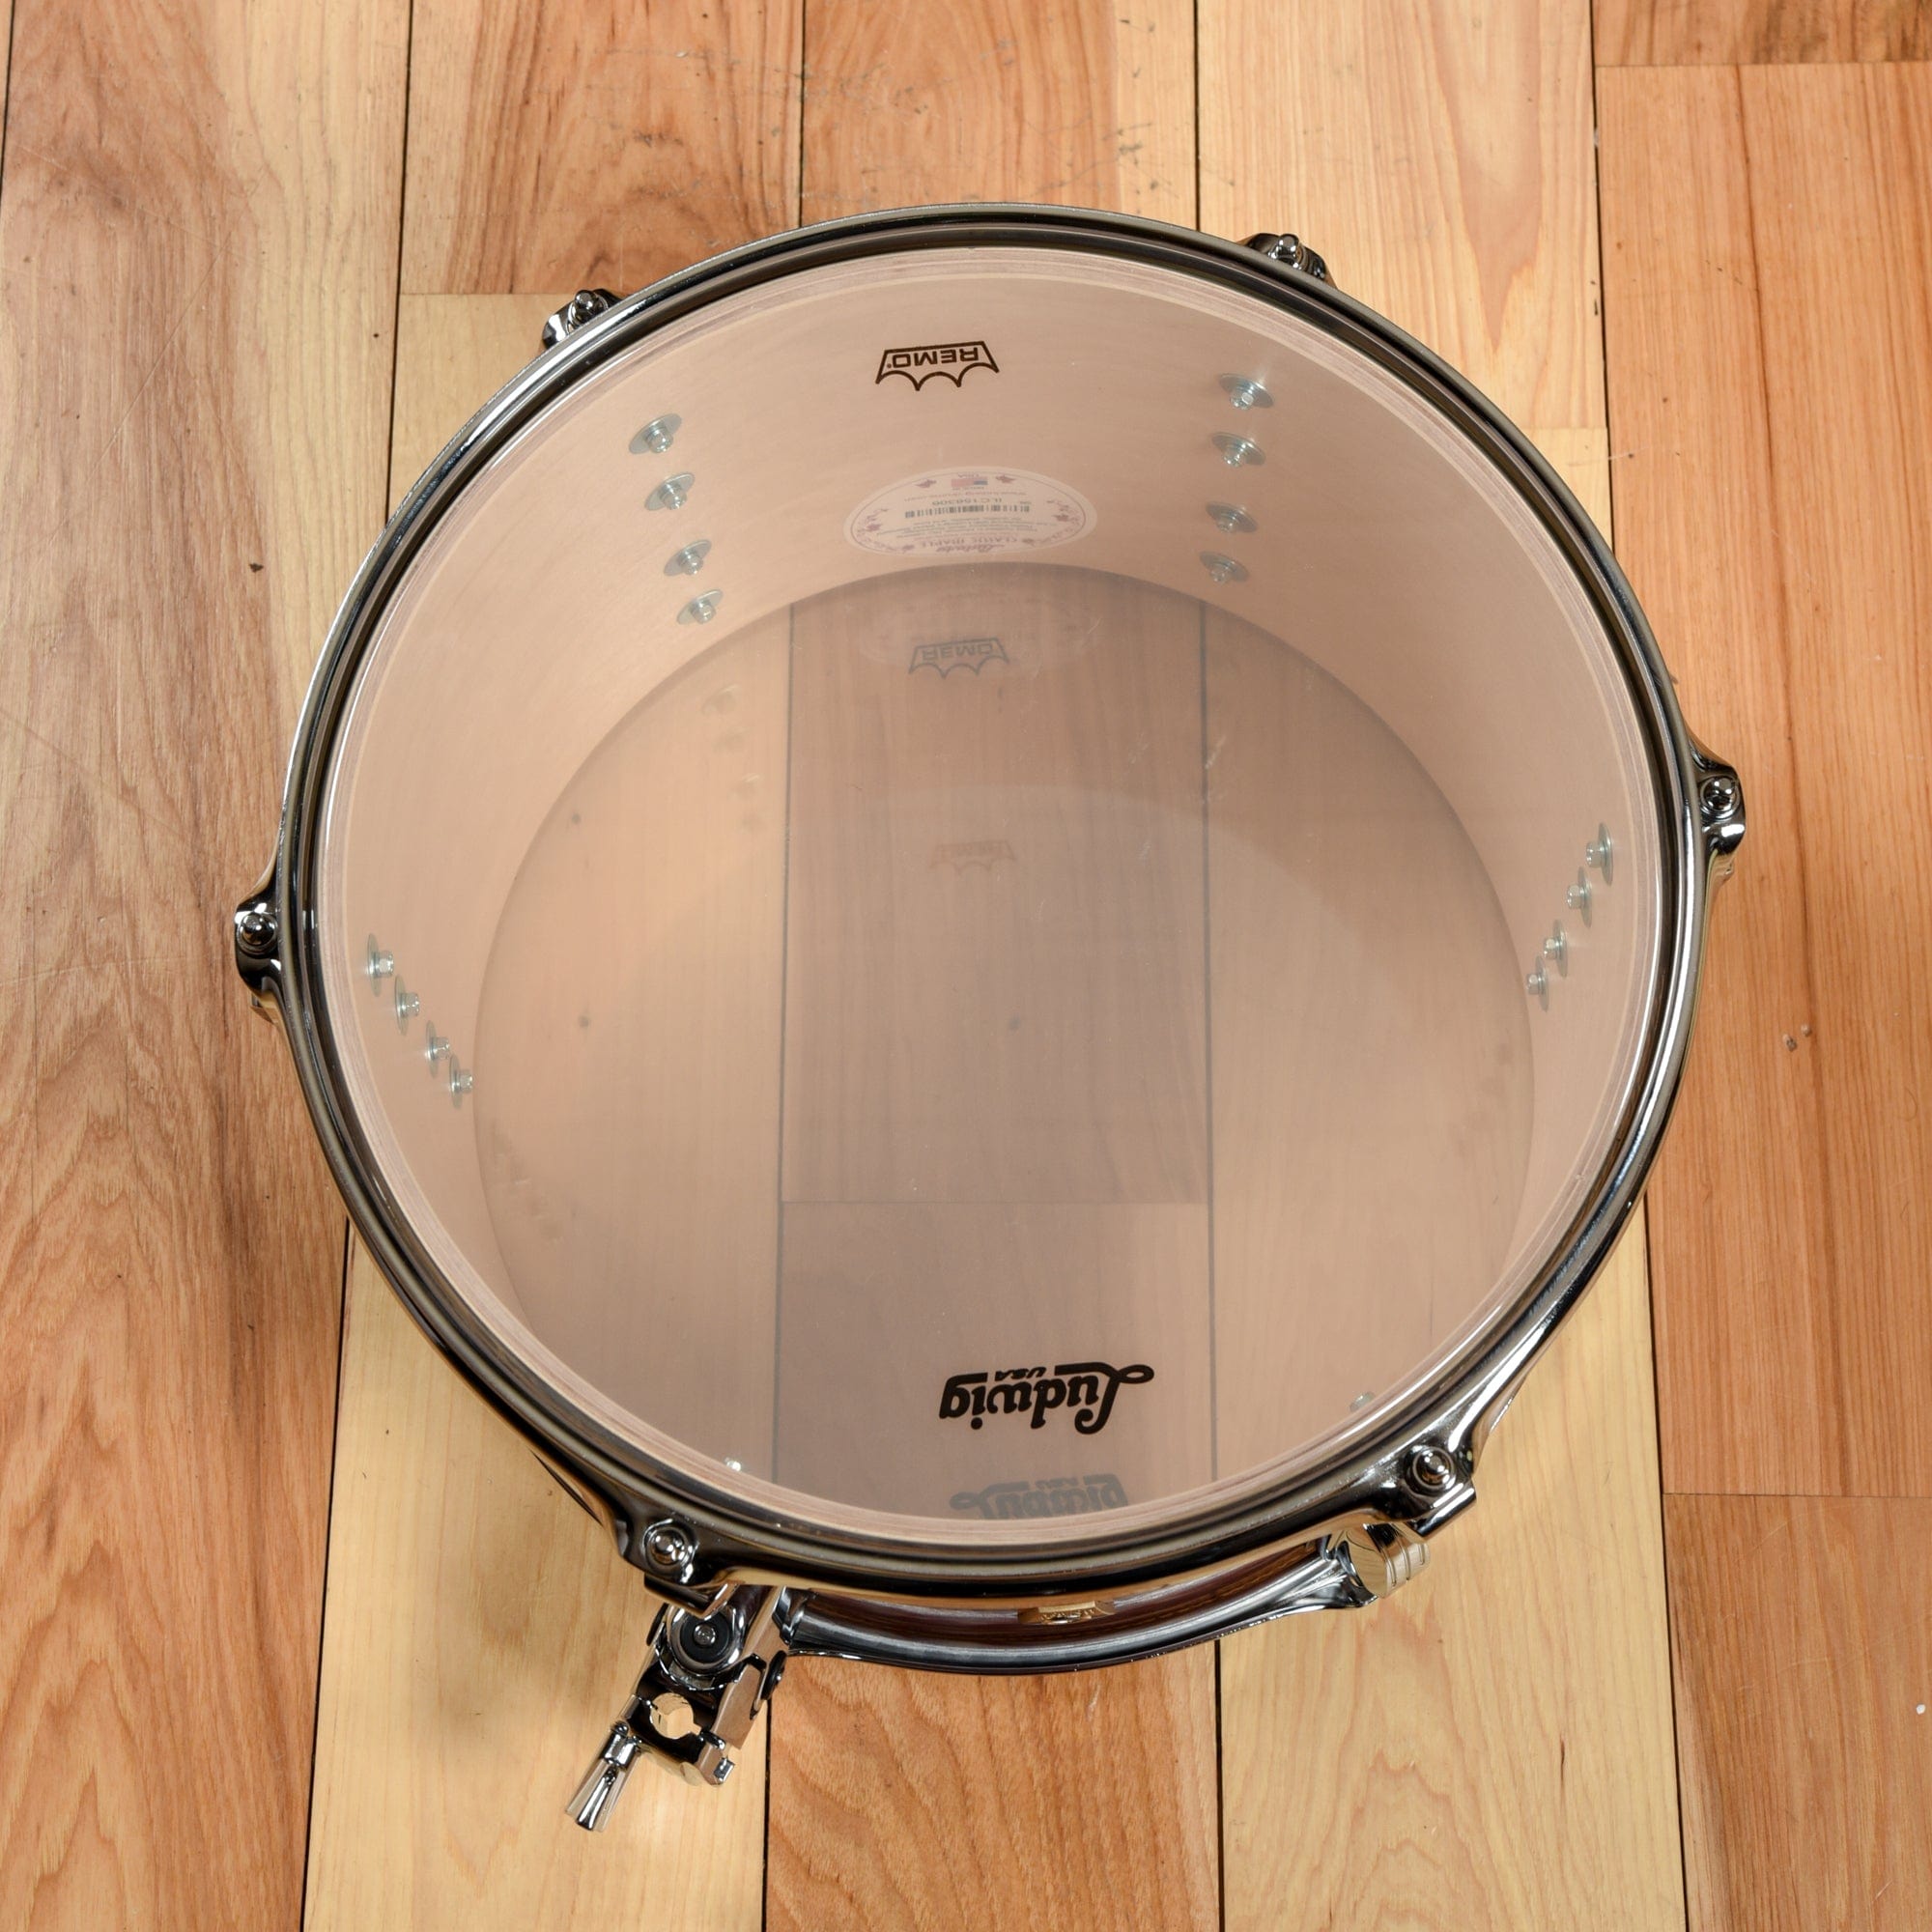 Ludwig Classic Maple 13/16/22 3pc. Drum Kit Vintage Pink Oyster Drums and Percussion / Acoustic Drums / Full Acoustic Kits